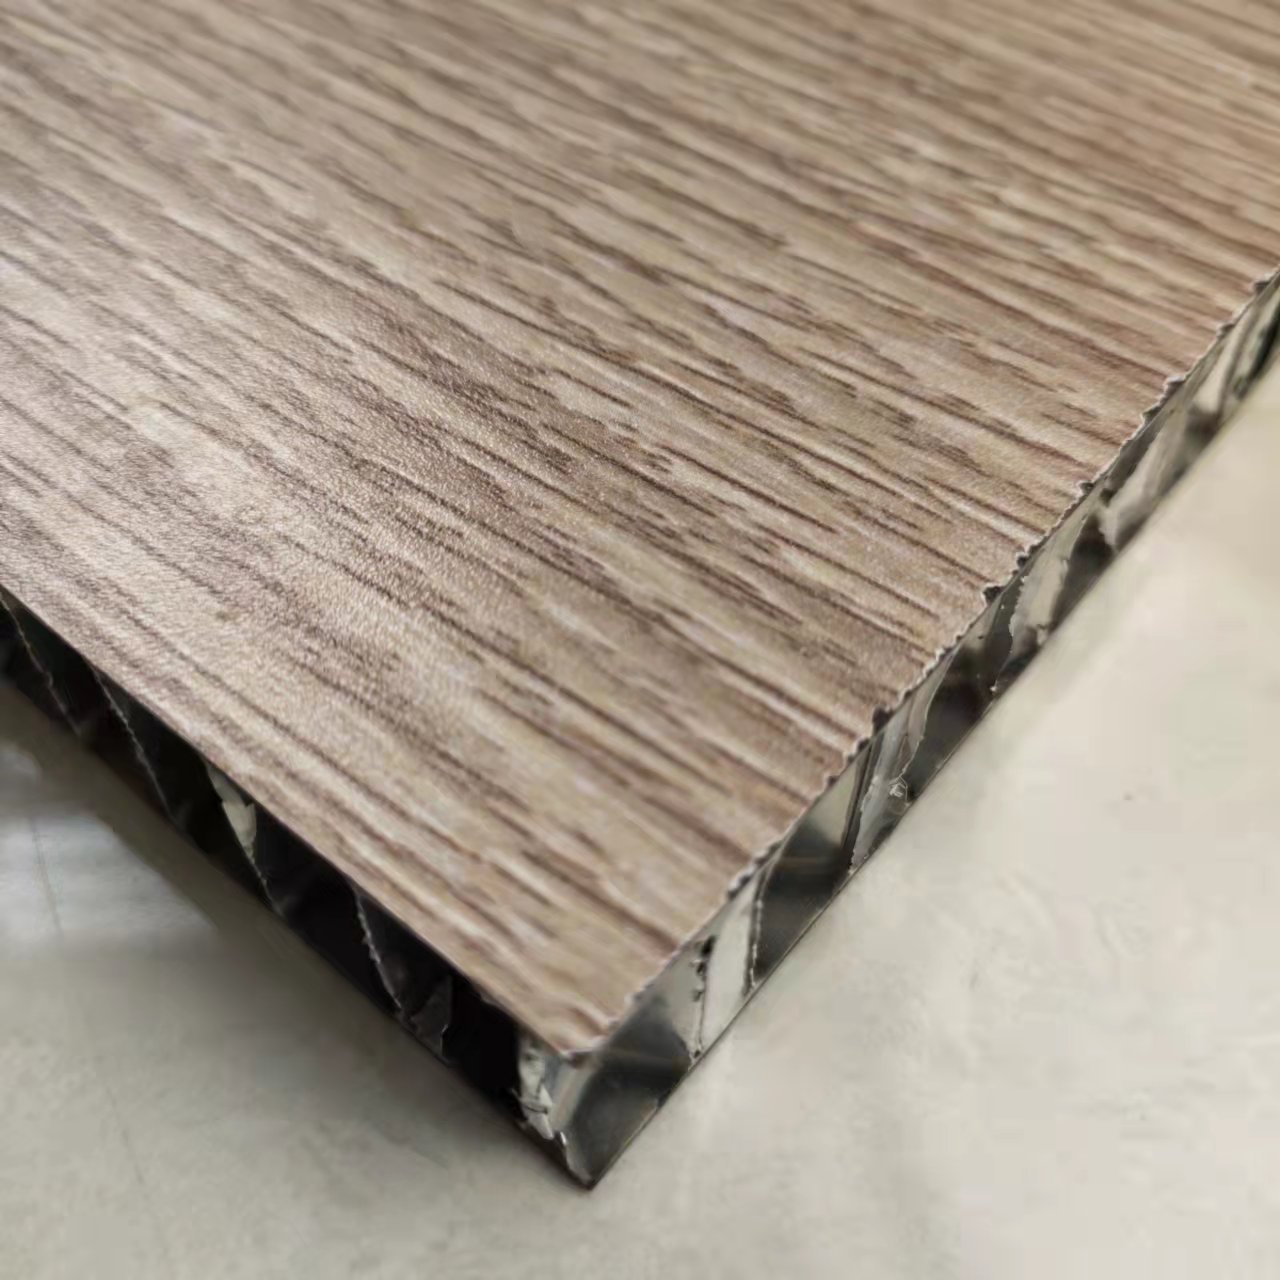 Wood Color Decorative 20mm Thickness HPL Honeycomb Panel For Vessel Interior